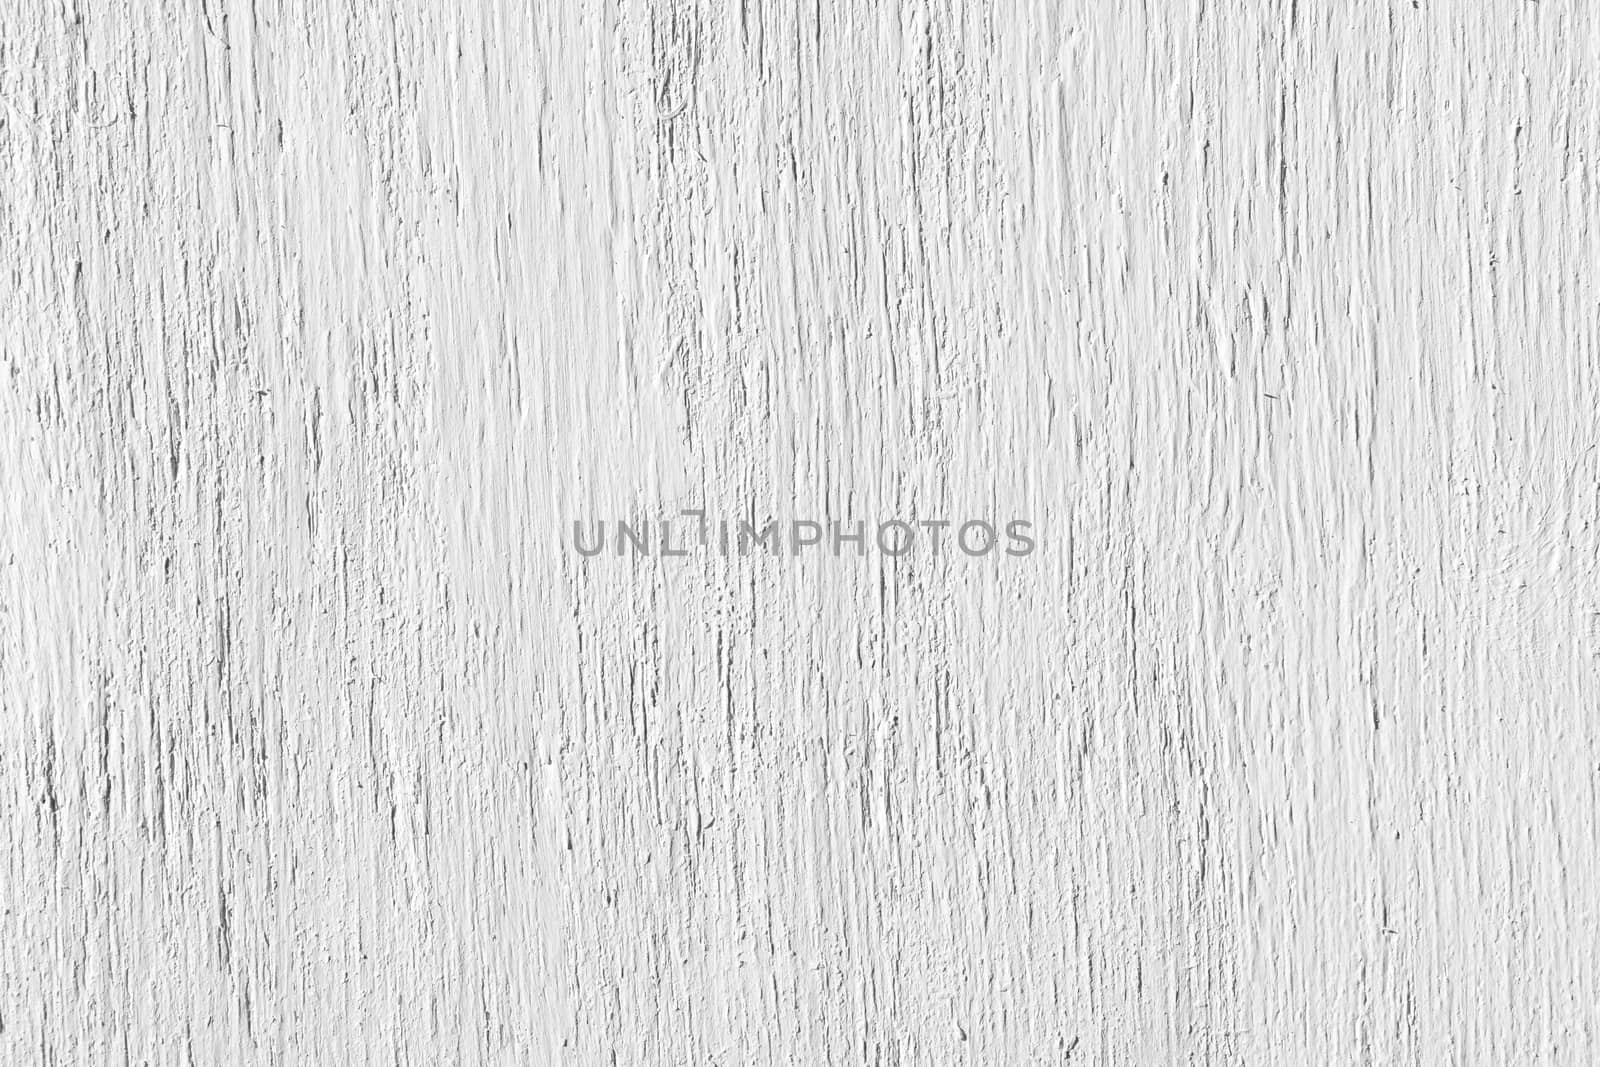 It is a conceptual or metaphor wall banner, grunge, material, aged, rust or construction. Background of light  wooden planks